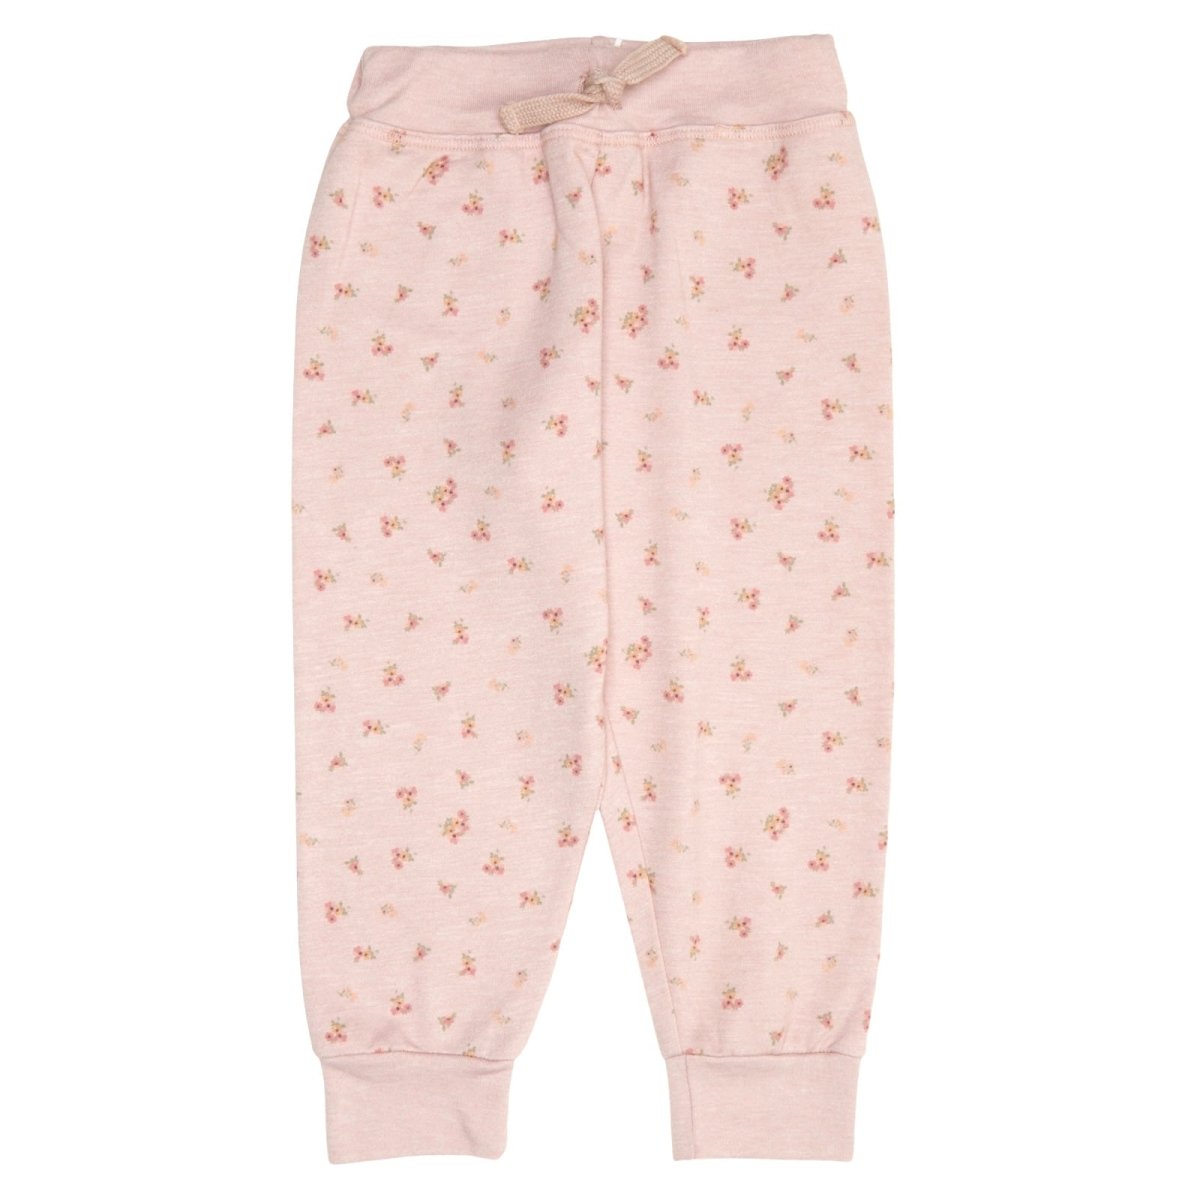 PETITE FLORAL SWEATPANTS - COZII BY T2LOVE